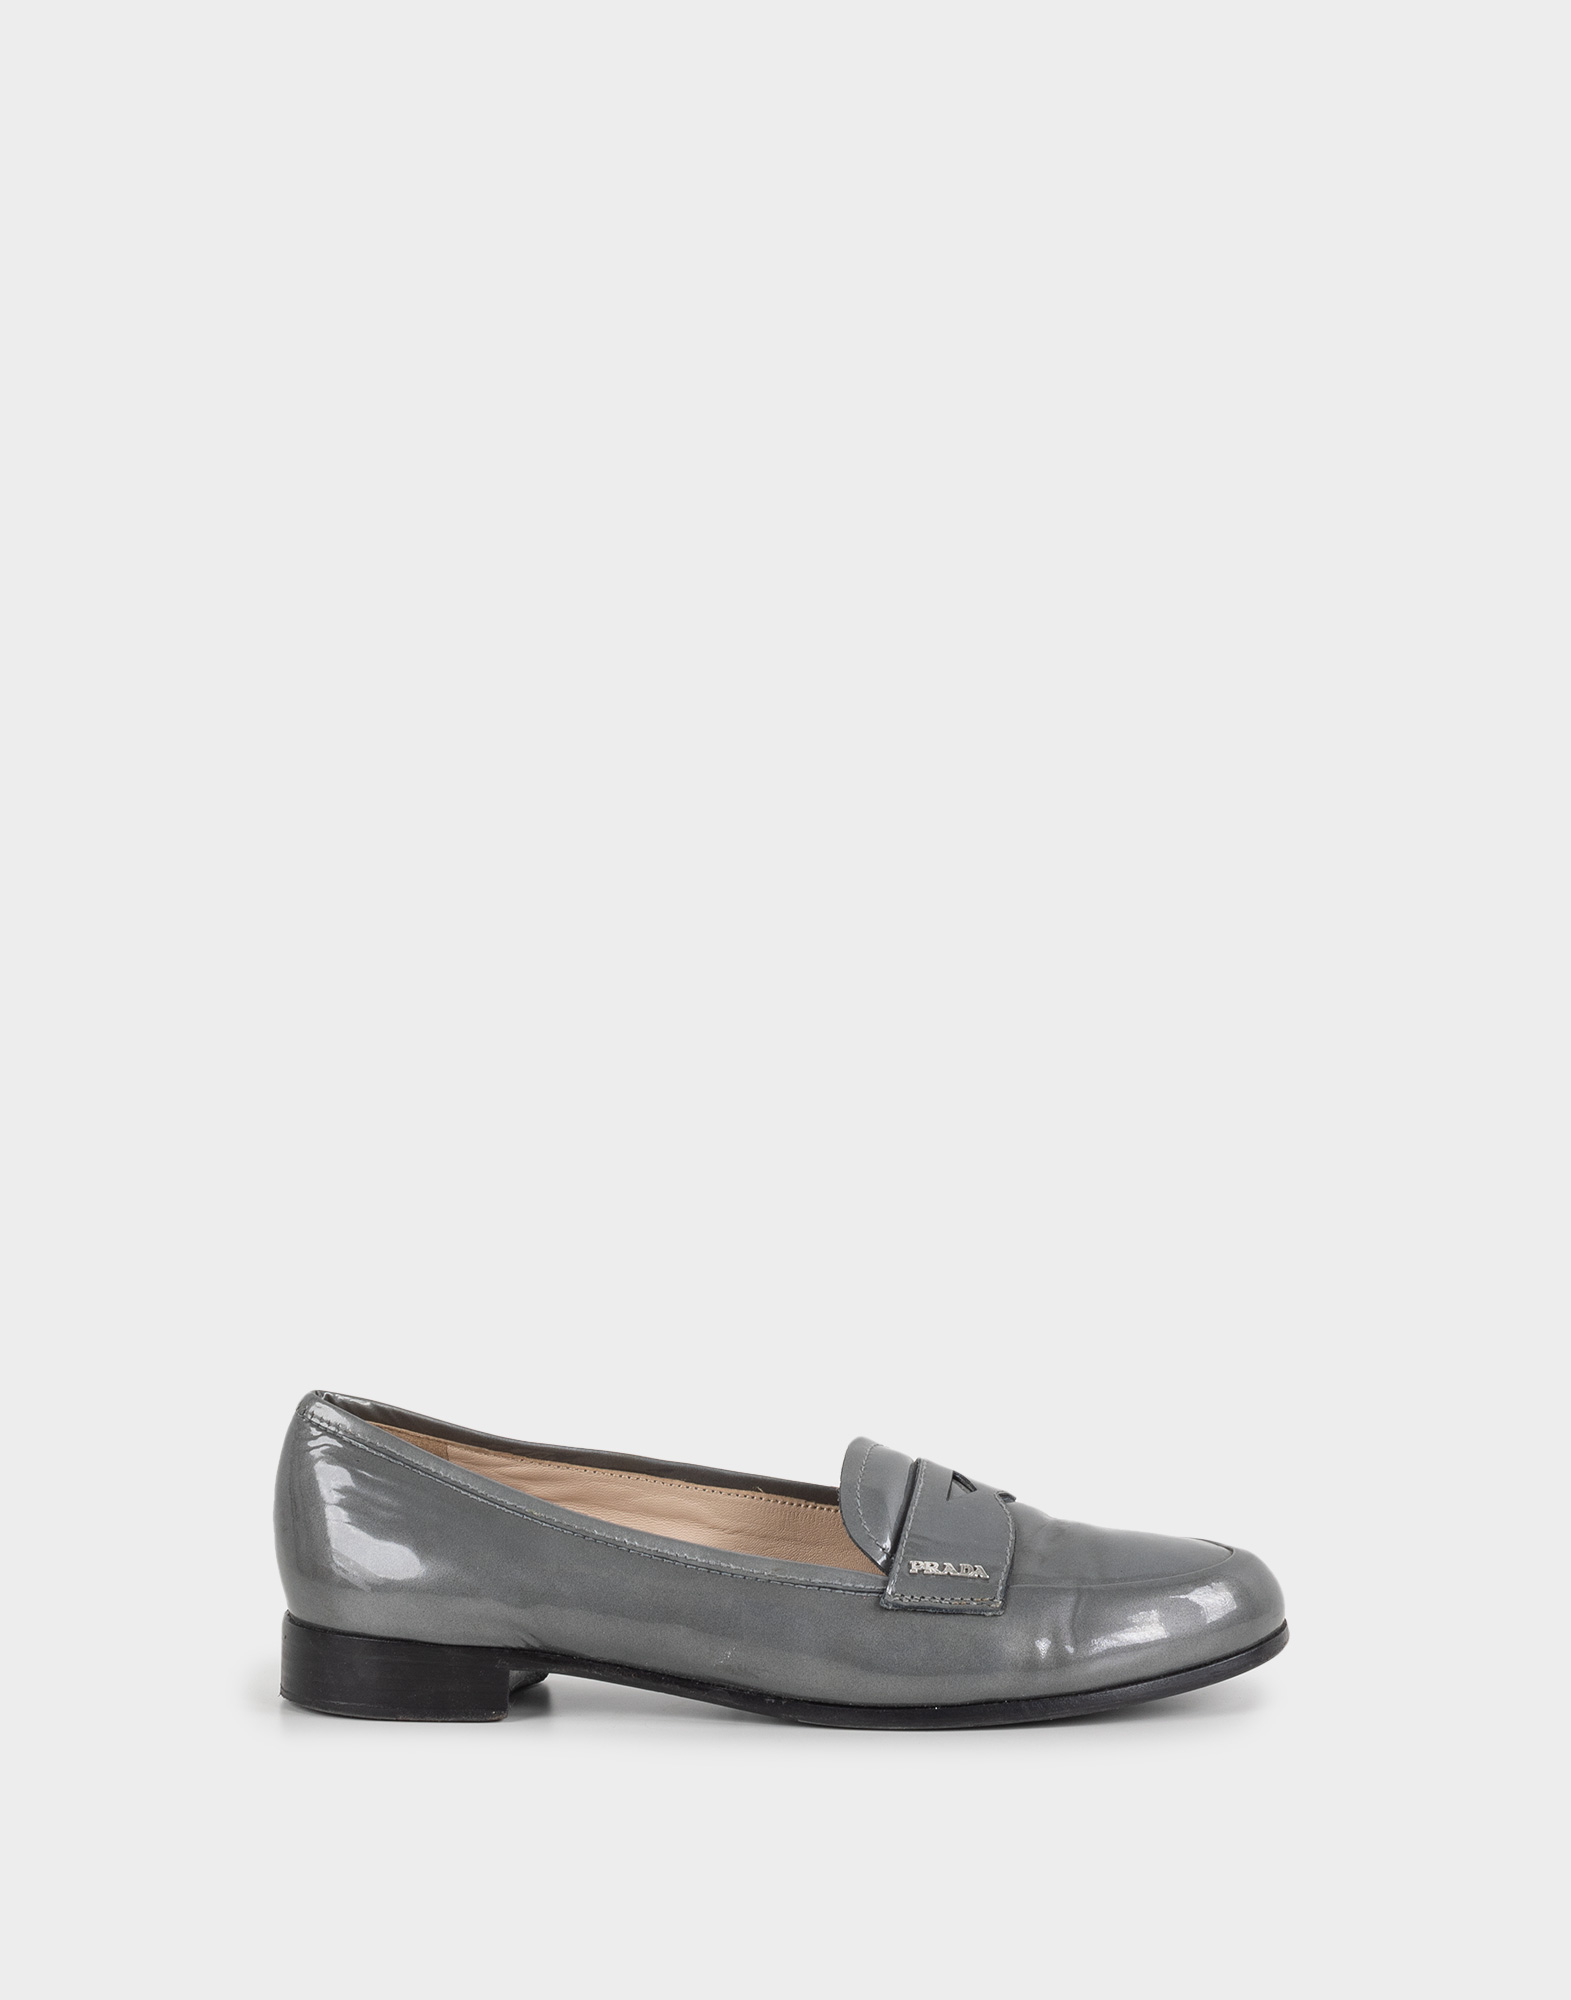 grey leather women's moccasins with silver-coloured logo applied to the front